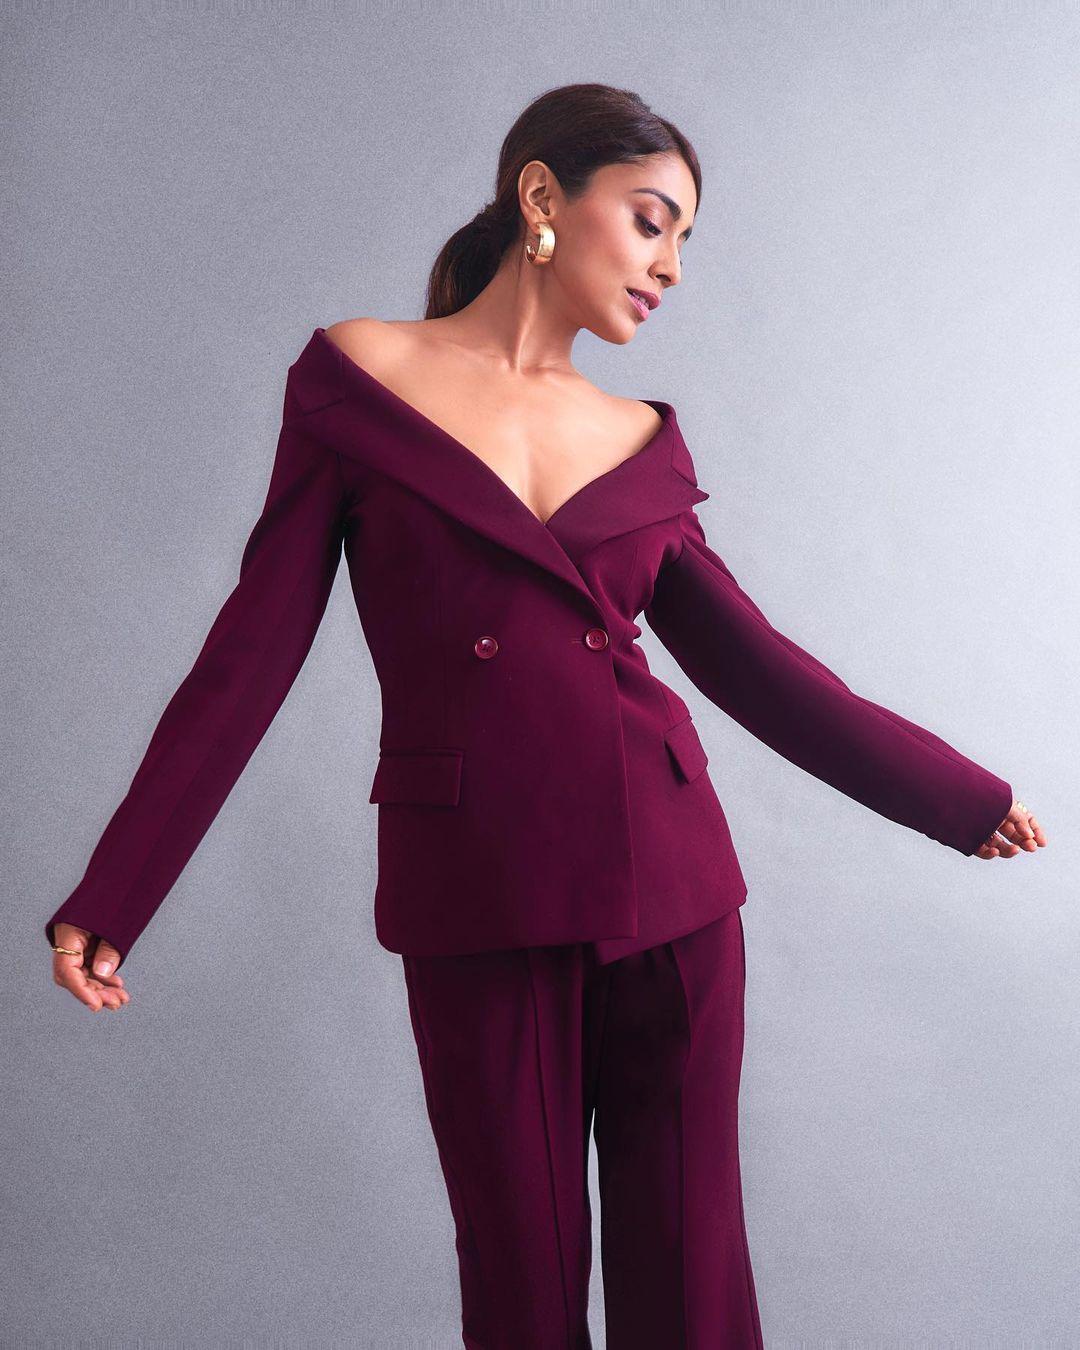 For her hairstyle, Shriya opted for a sleek and chic ponytail. It's the kind of hairstyle that says you're ready for a night of fun and romance.